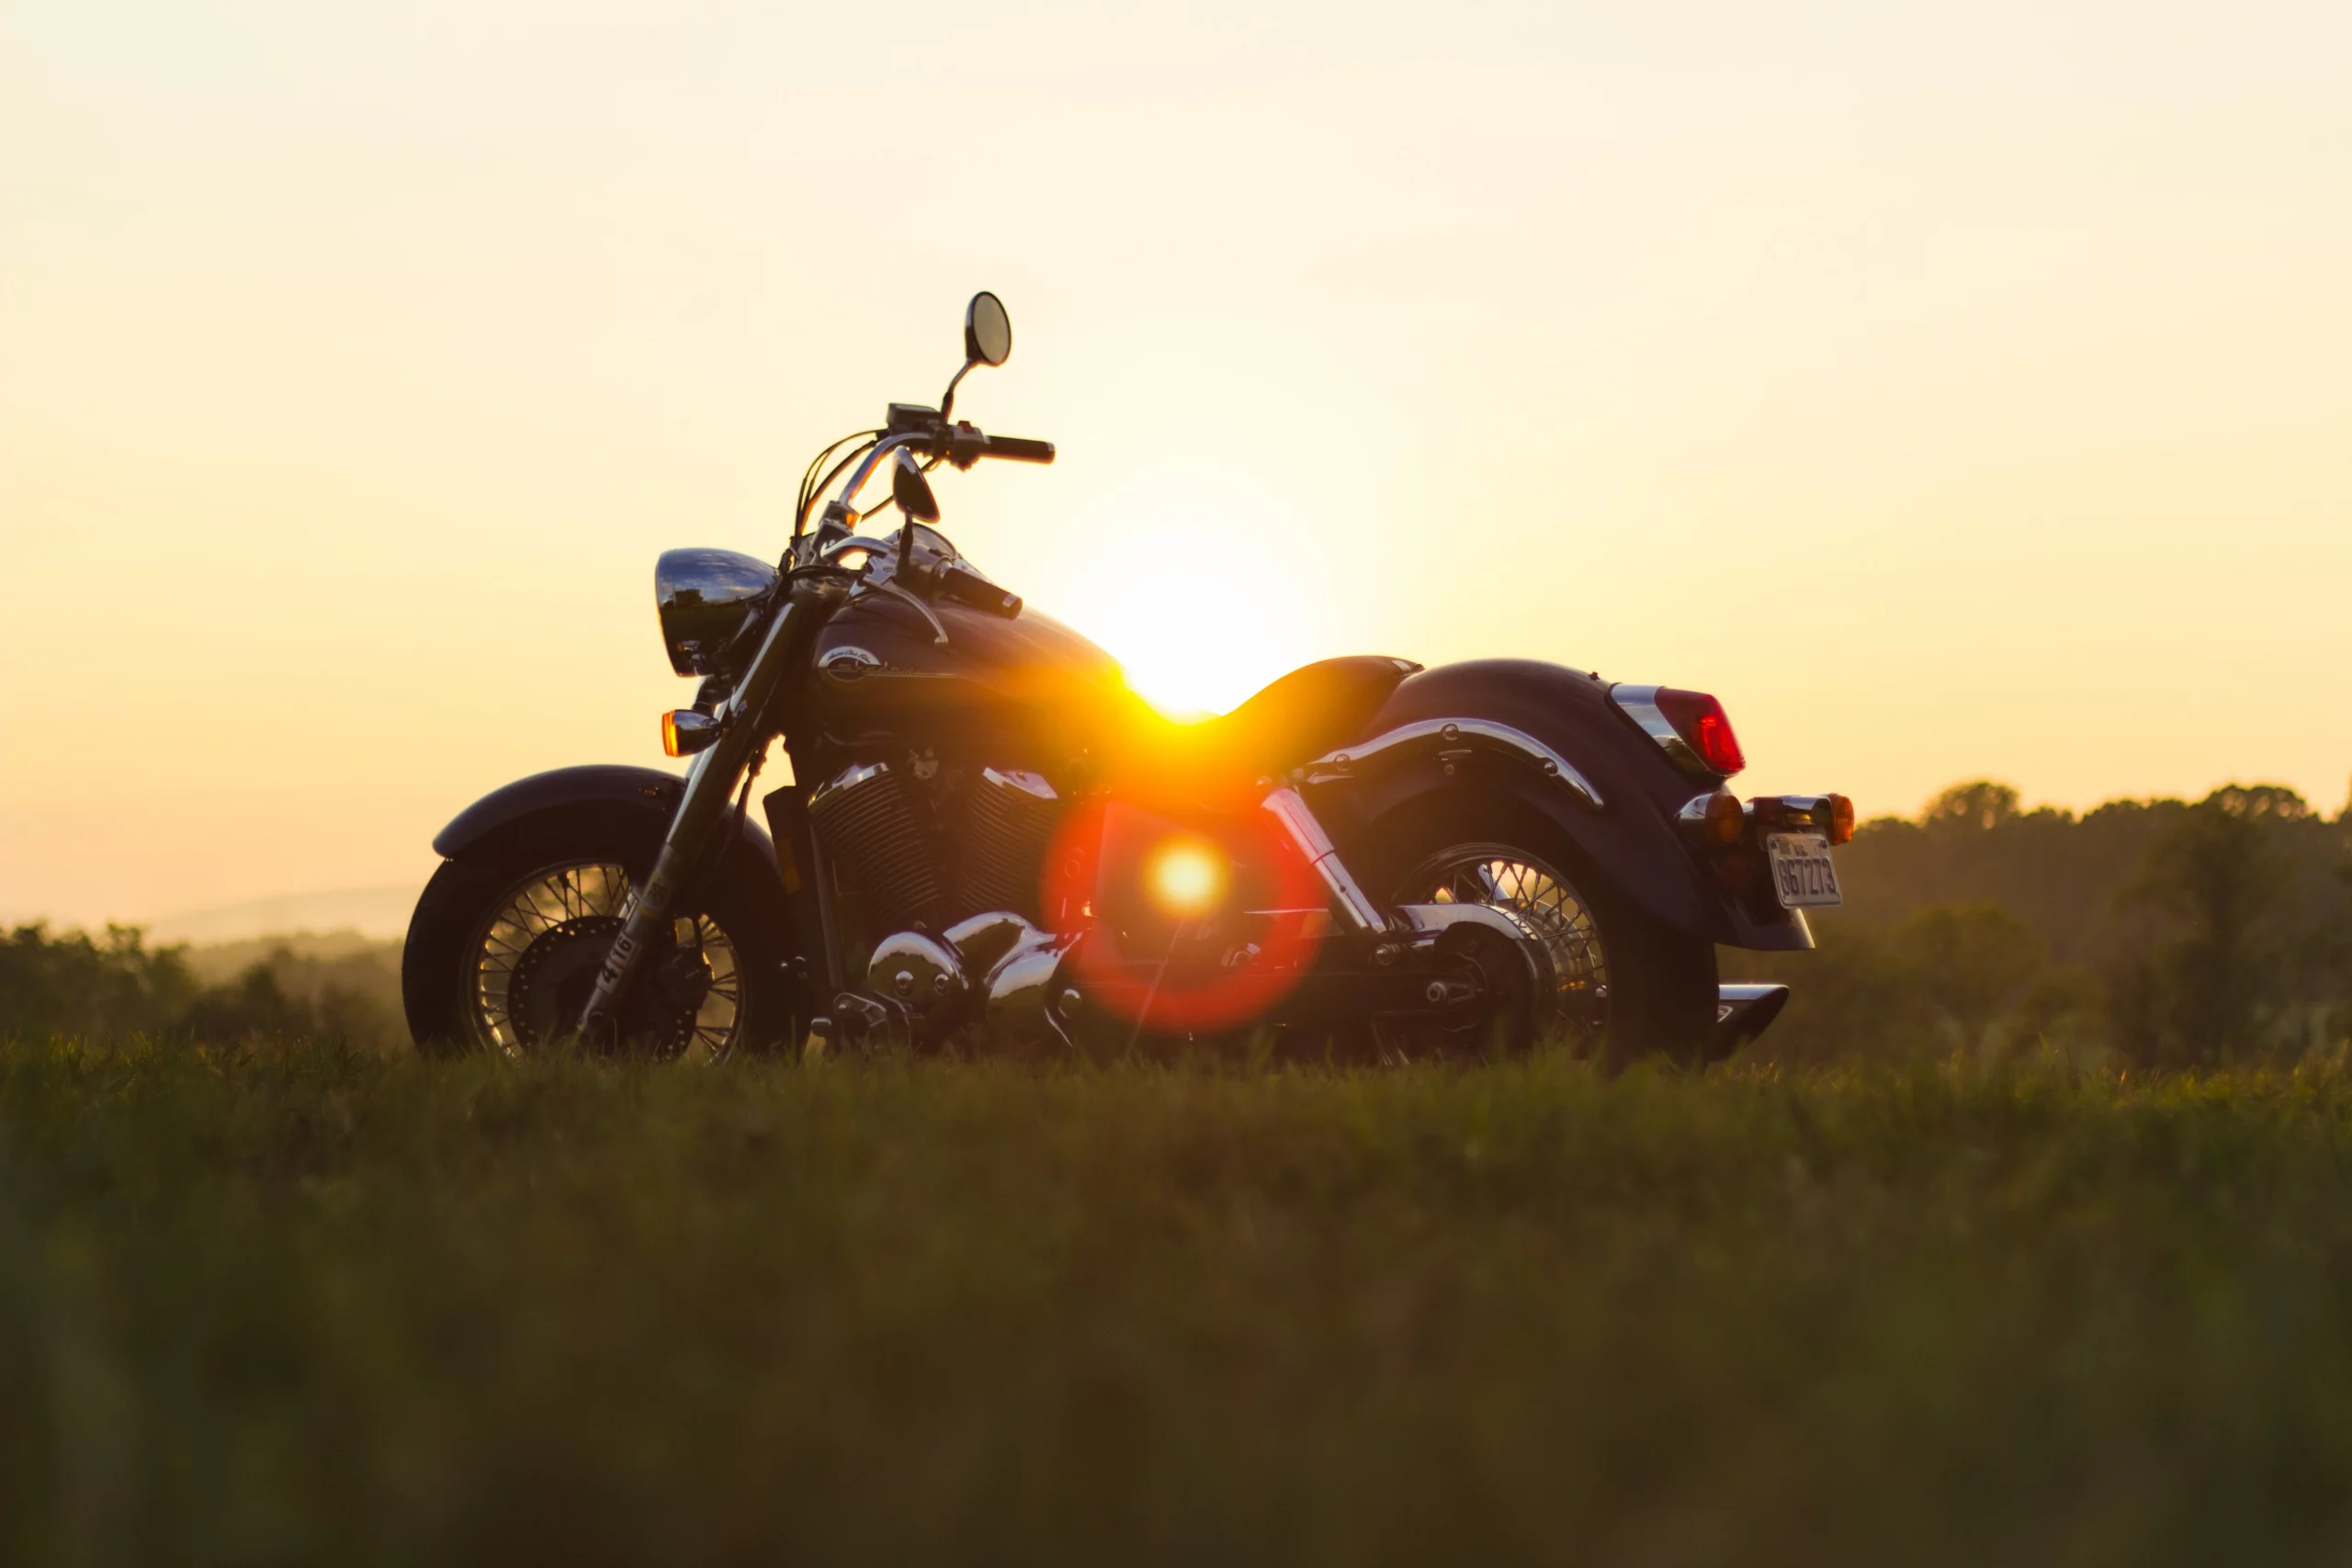 Injuries from Colorado Springs Motorcycle Accidents